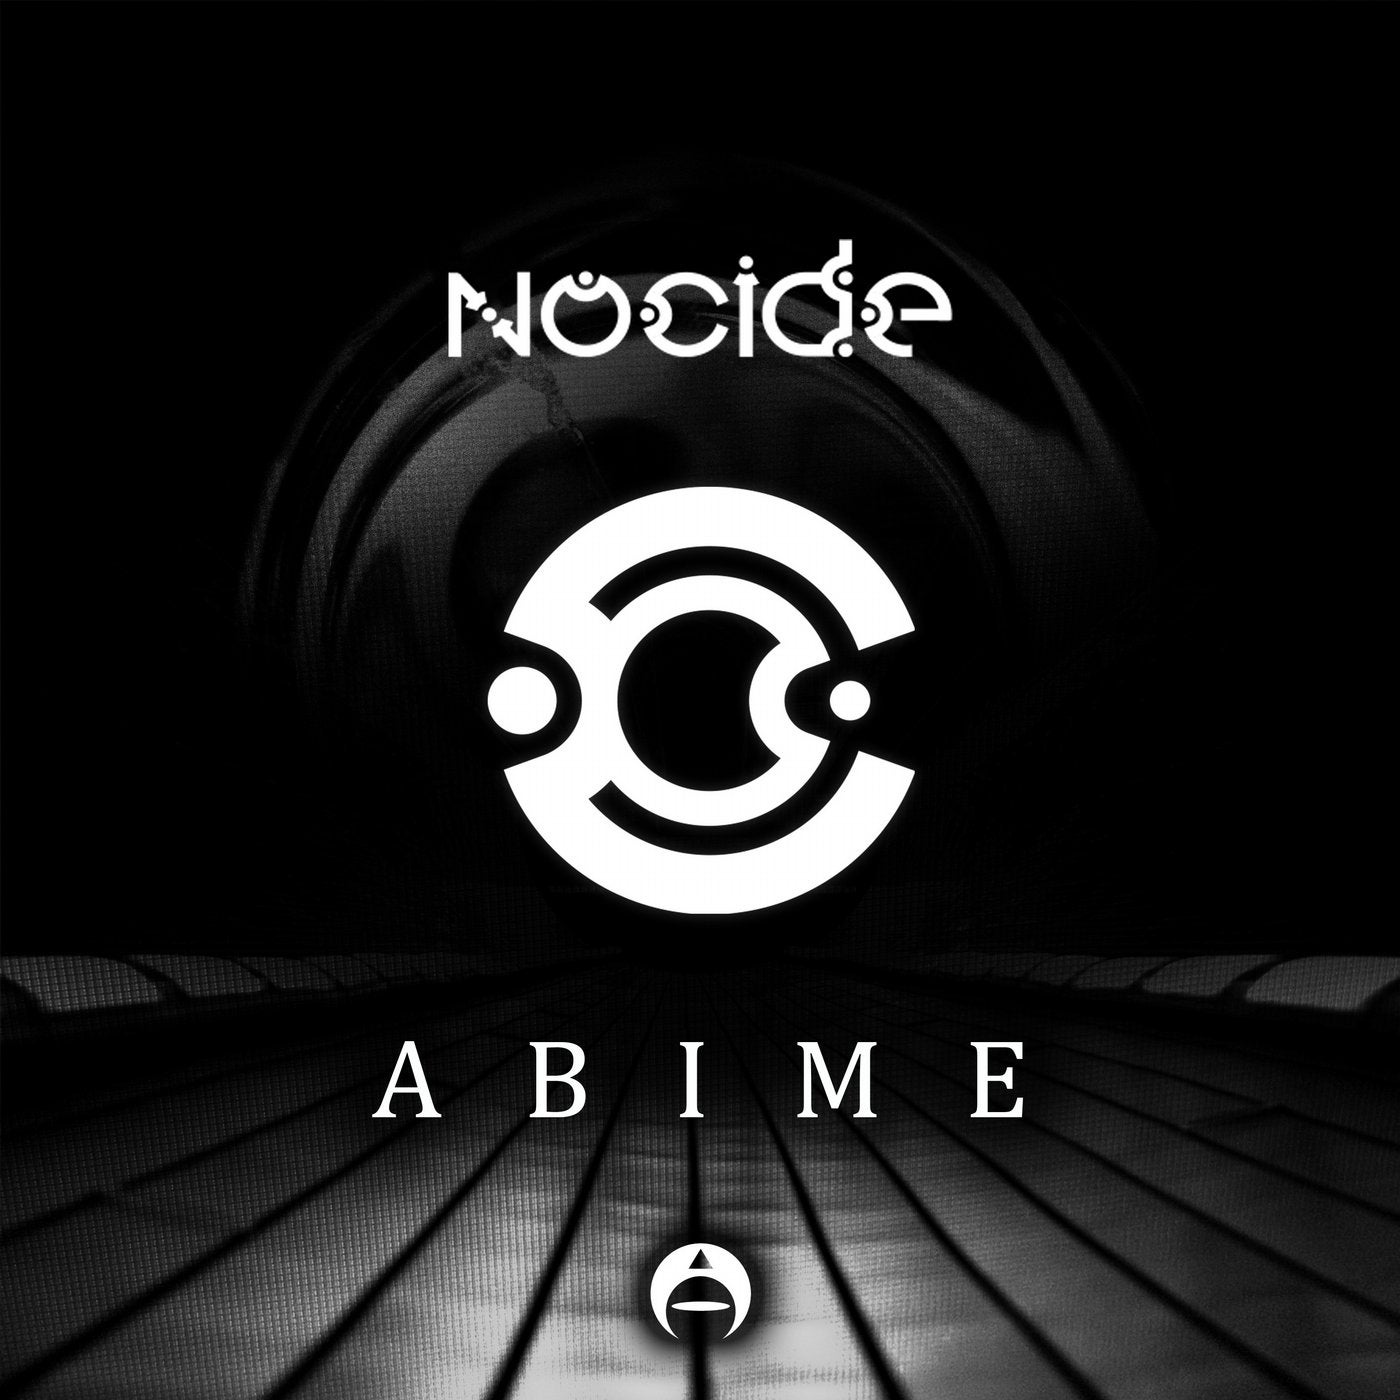 Abime